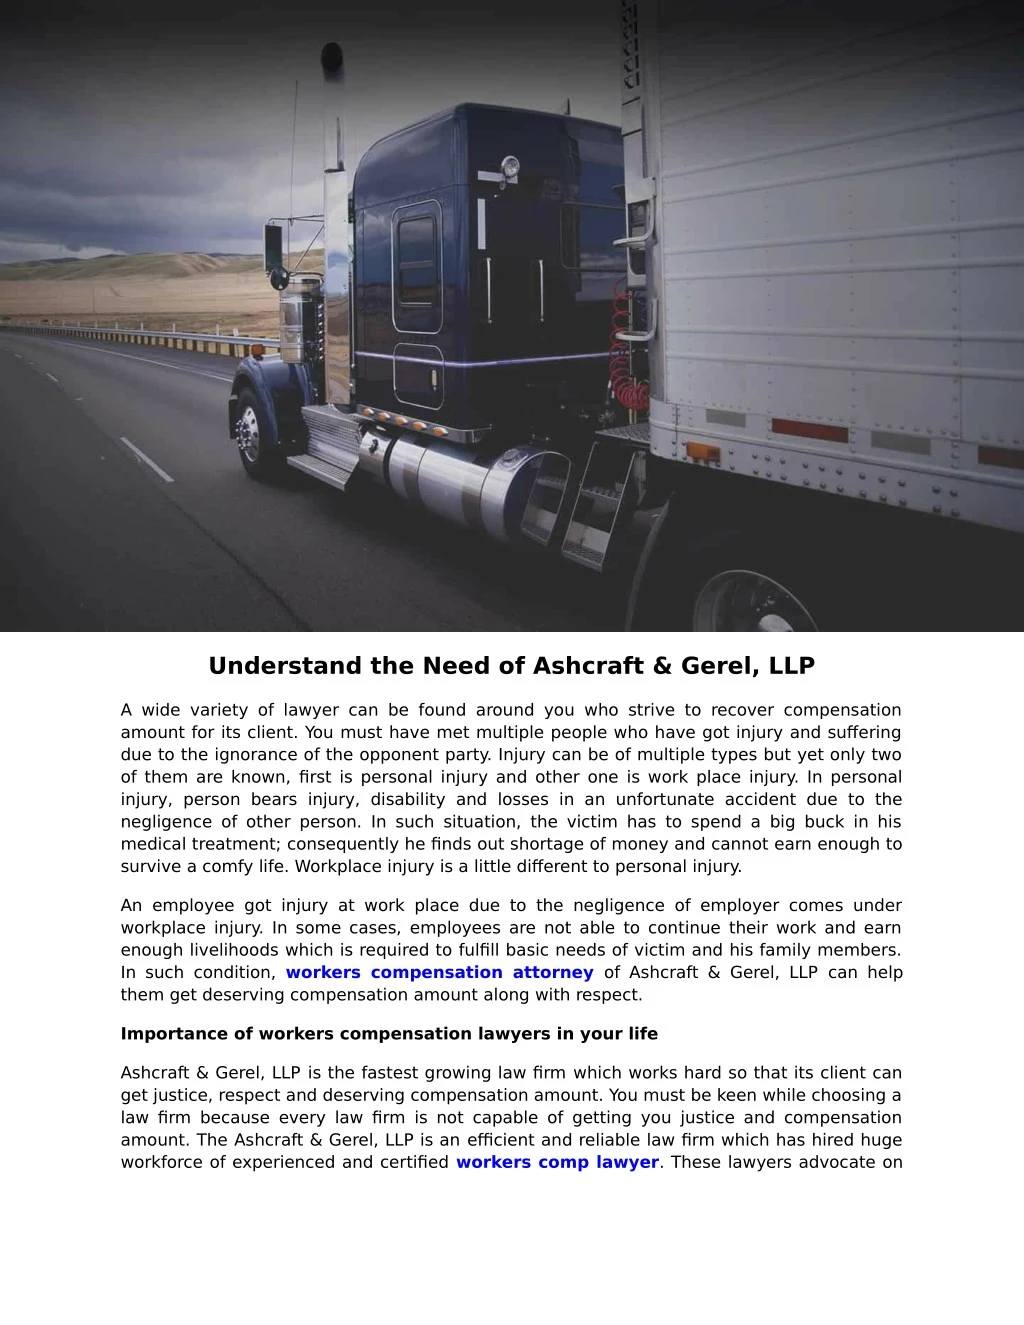 understand the need of ashcraft gerel llp